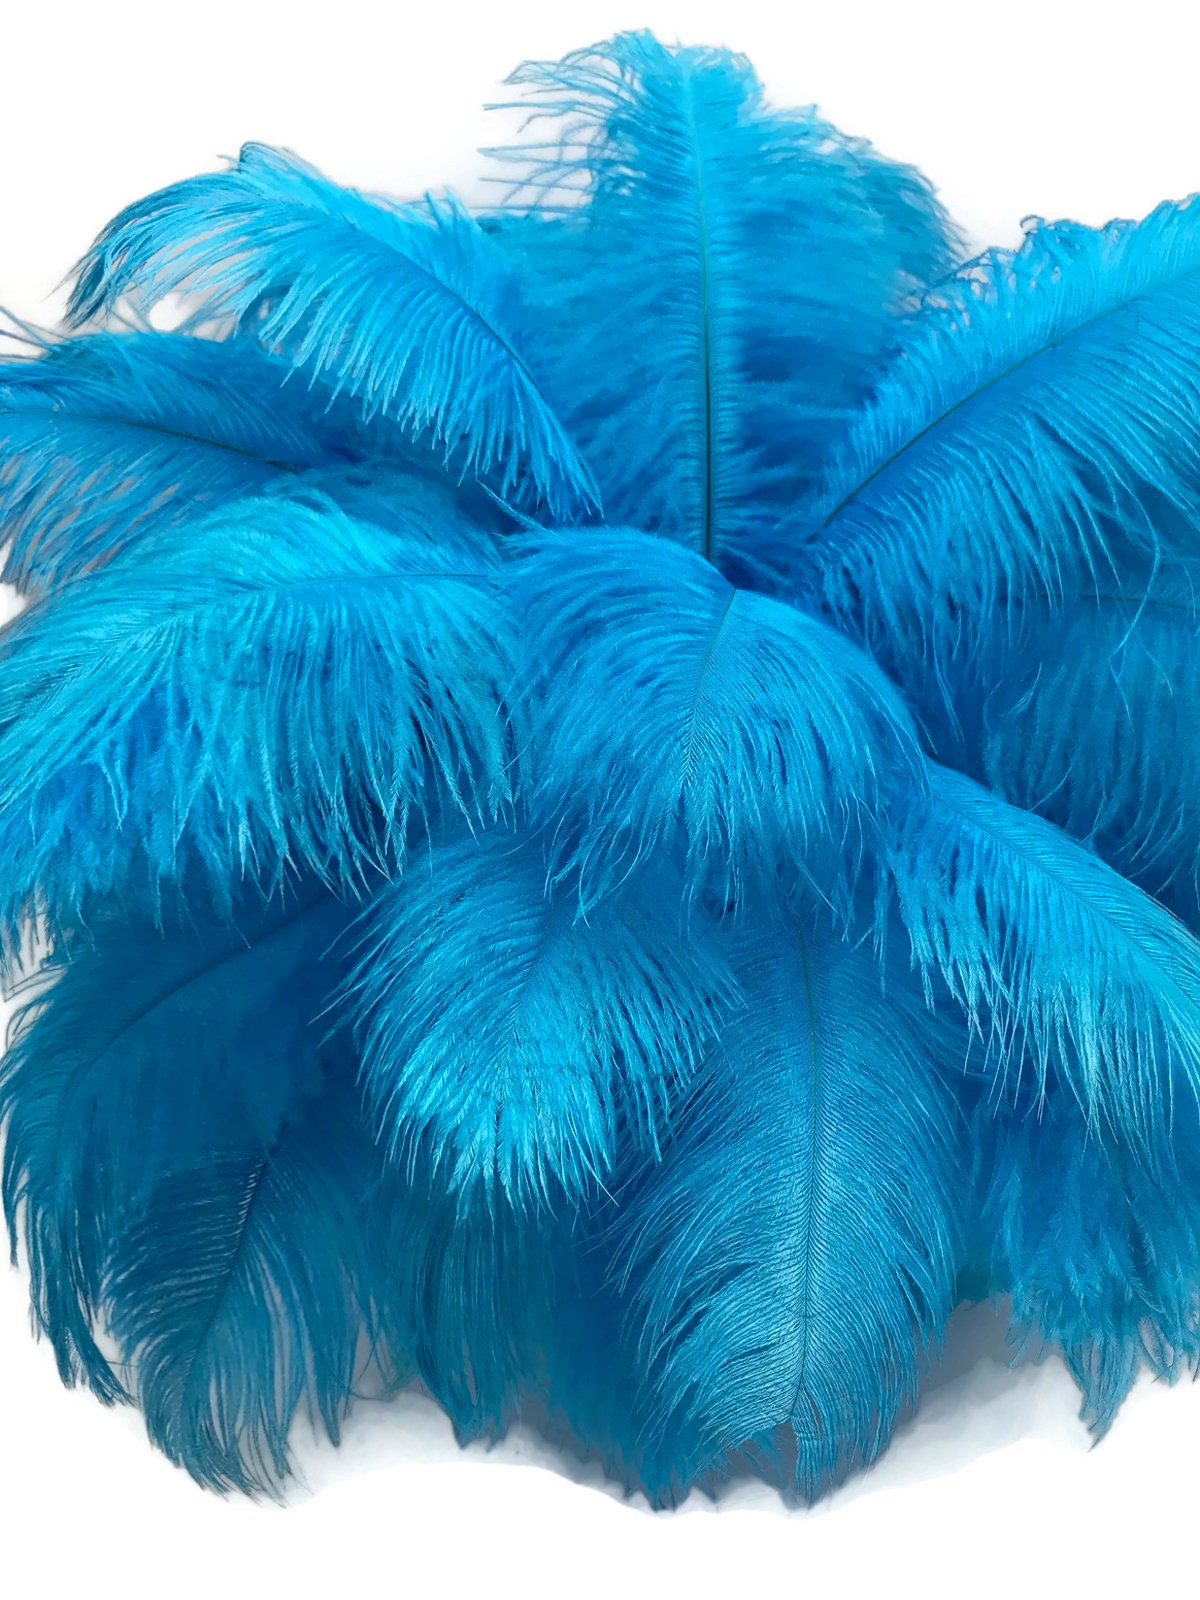 100 Pcs Natural Ostrich Feathers Bulk 8-10 Inch/ 20-25 cm Large Ostrich  Feathers Plumes for Crafts Home Decoration Wedding Party Vase Decor